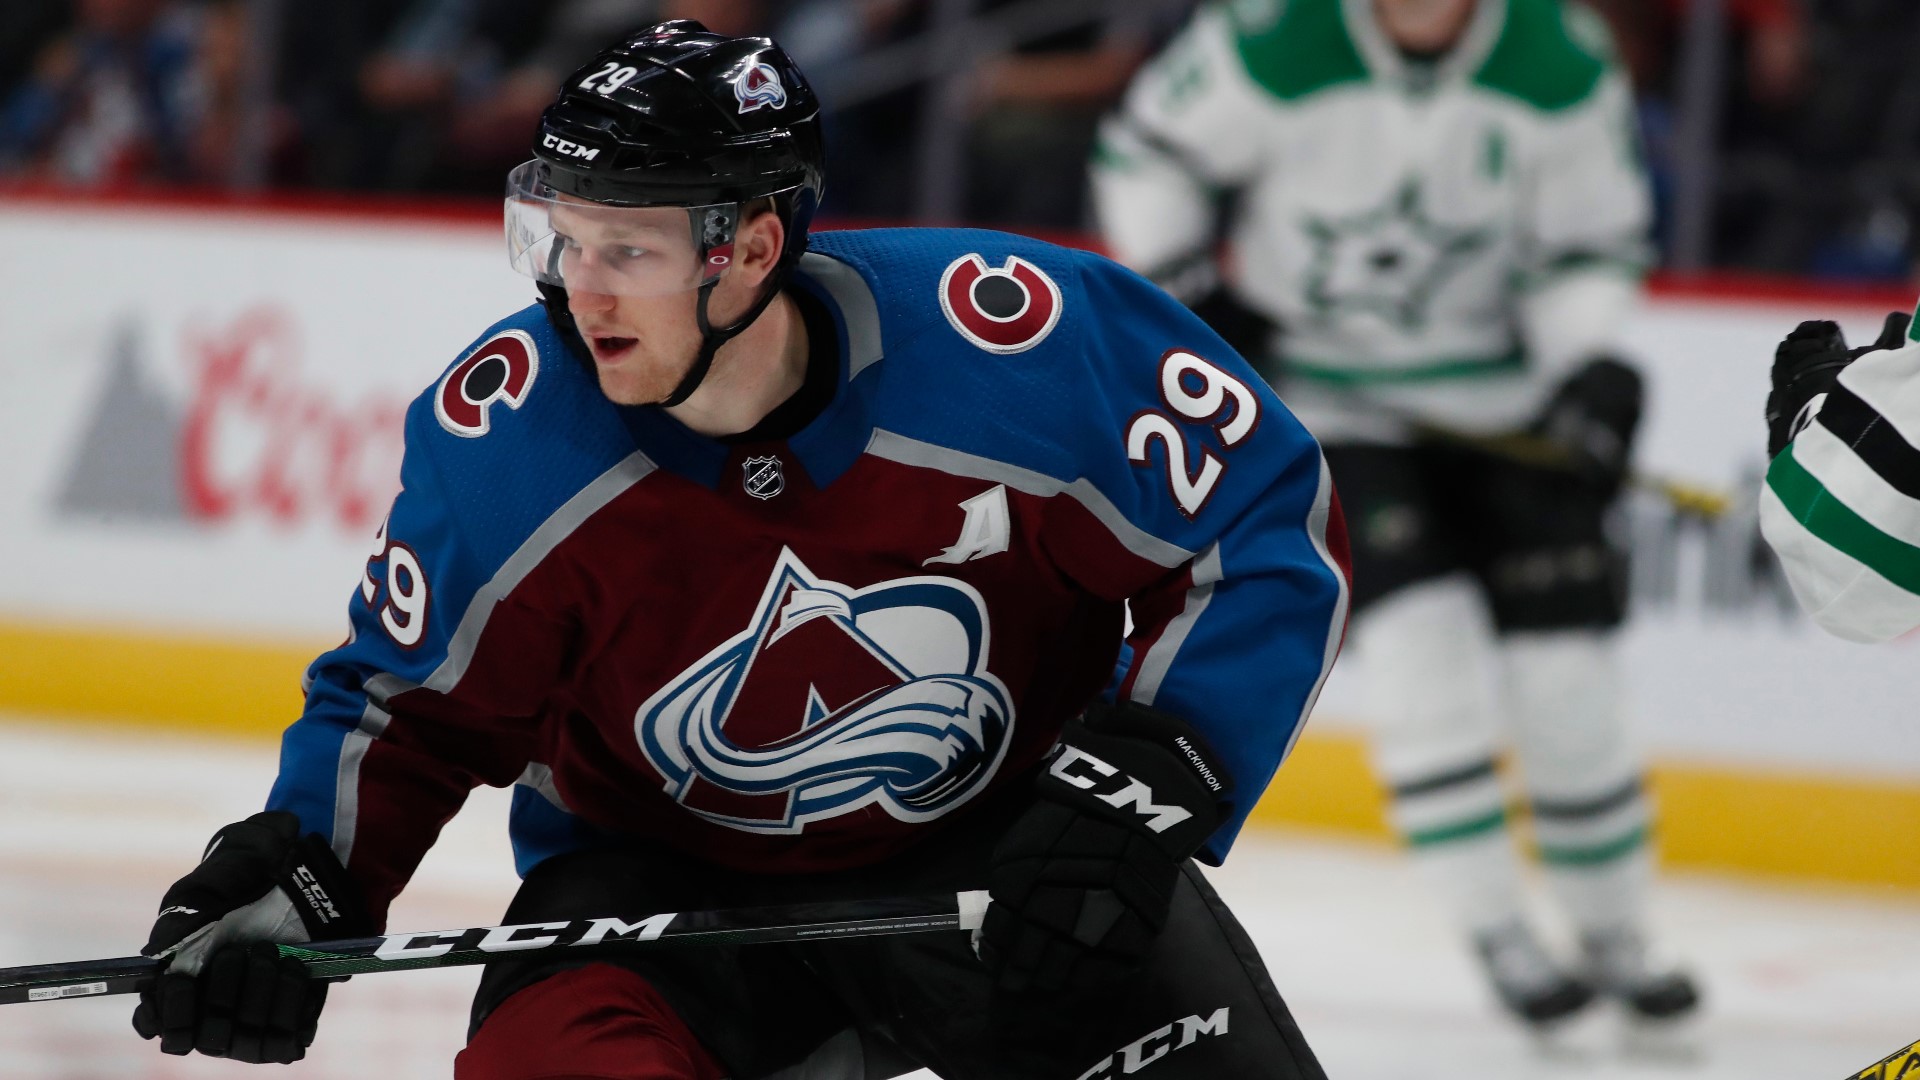 Avalanche needs a leader to step up in the absence of Gabriel Landeskog and Mikko Rantenen.